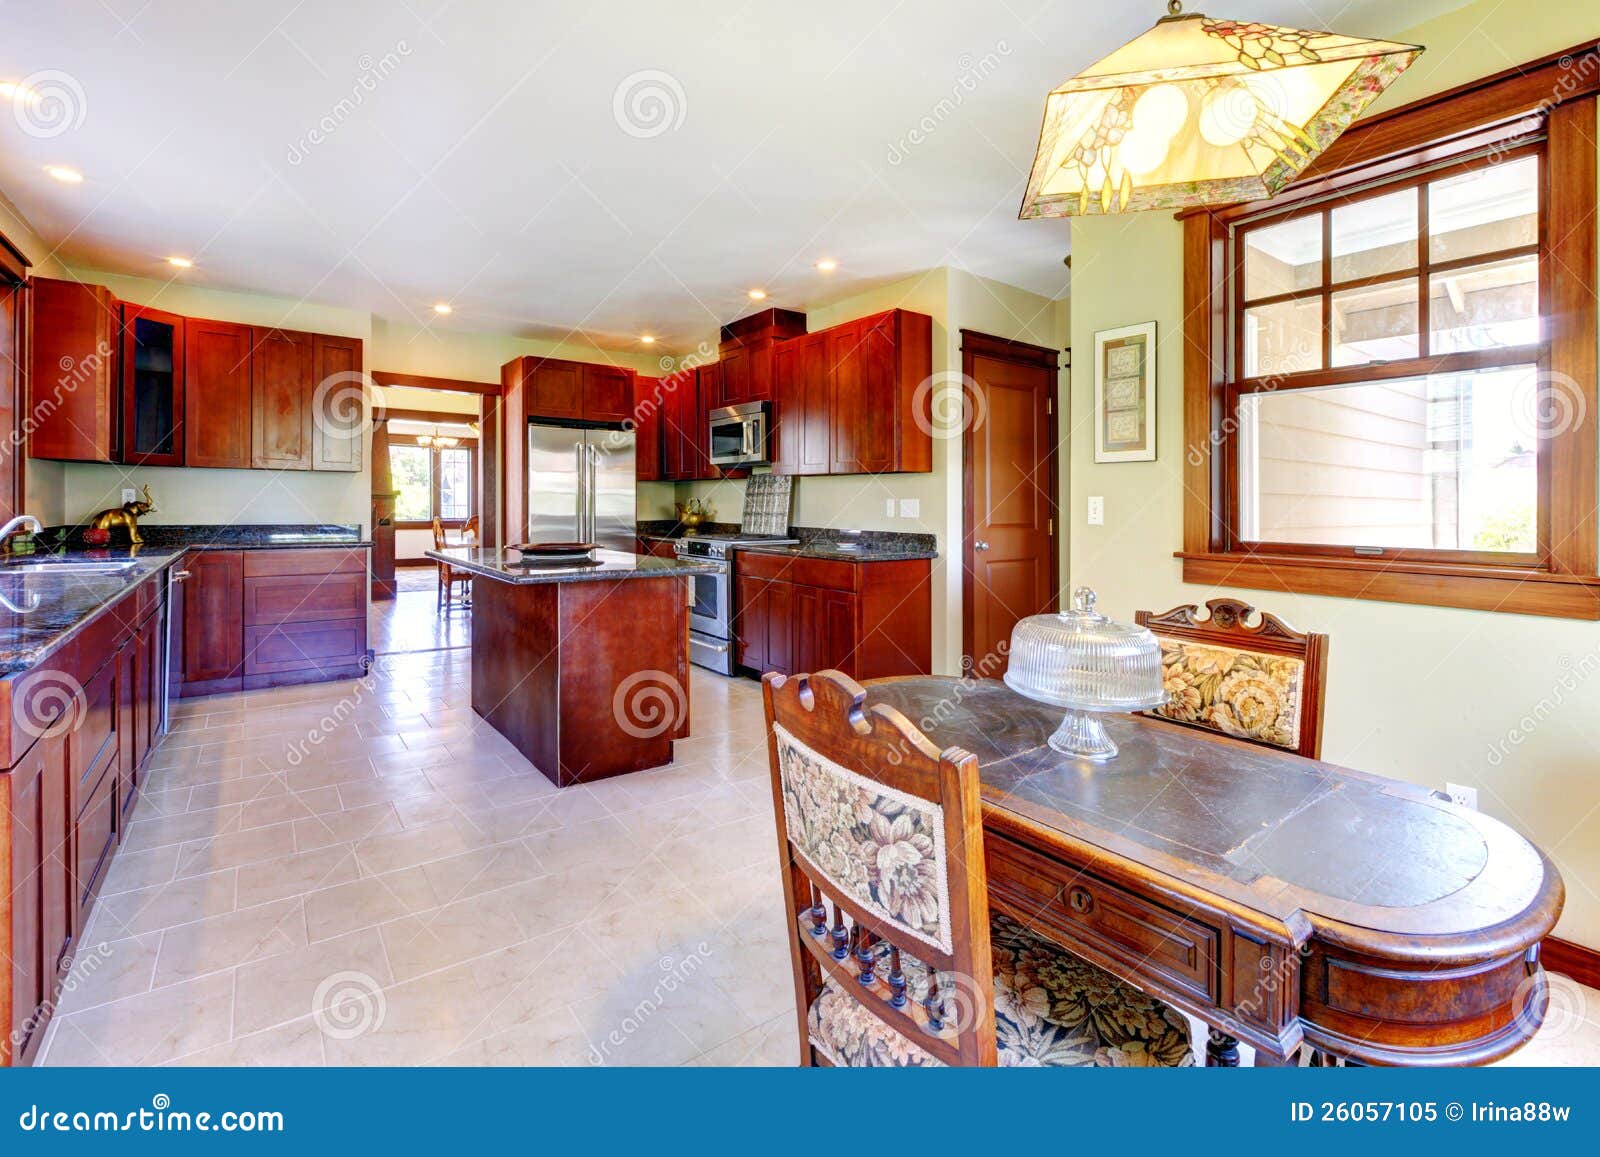 Large Chery Wood Kitchen With Dining Room Table. Royalty ...